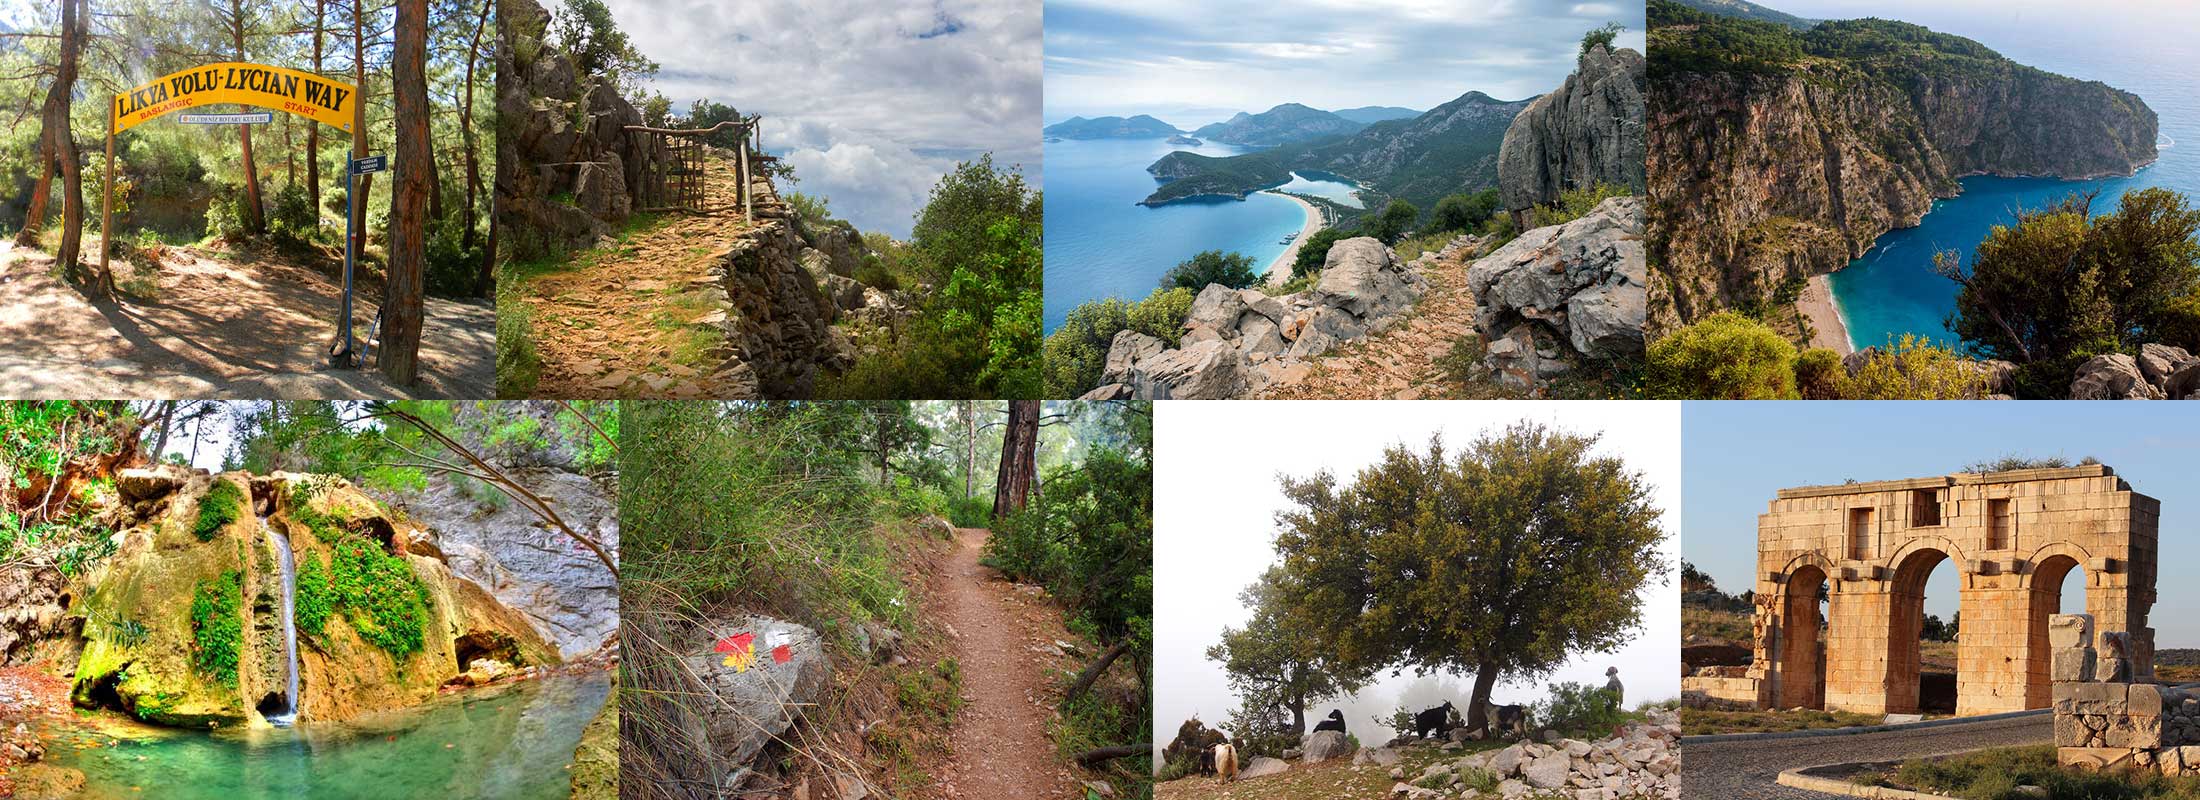 8-days-TREKKING-AND-EXPEDITION-ON-THE-WEST-LYCIAN-WAY